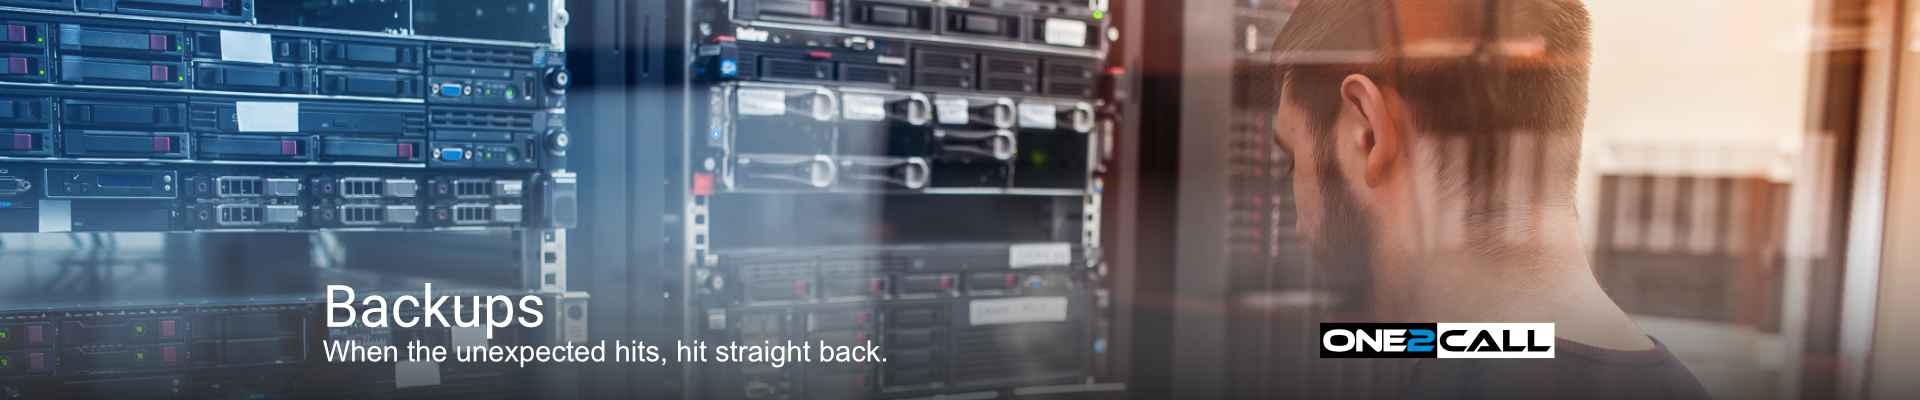 Backups - When the unexpected hits, hit straight back.